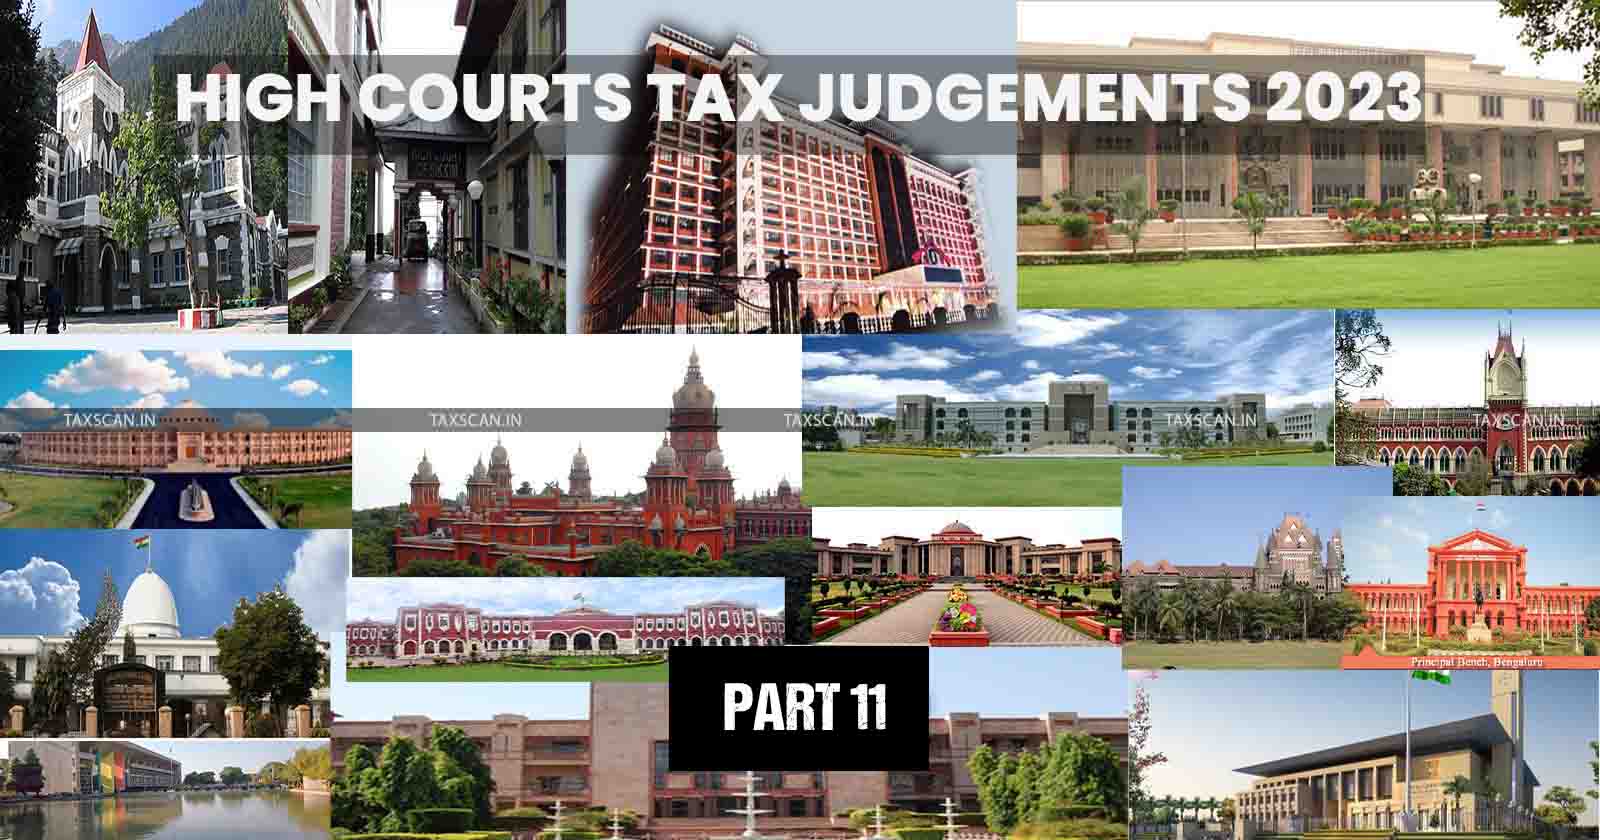 High Courts Annual Digest 2023 - Annual Digest 2023 - Tax Judgment of High Courts - hc - high courts - TAXSCAN